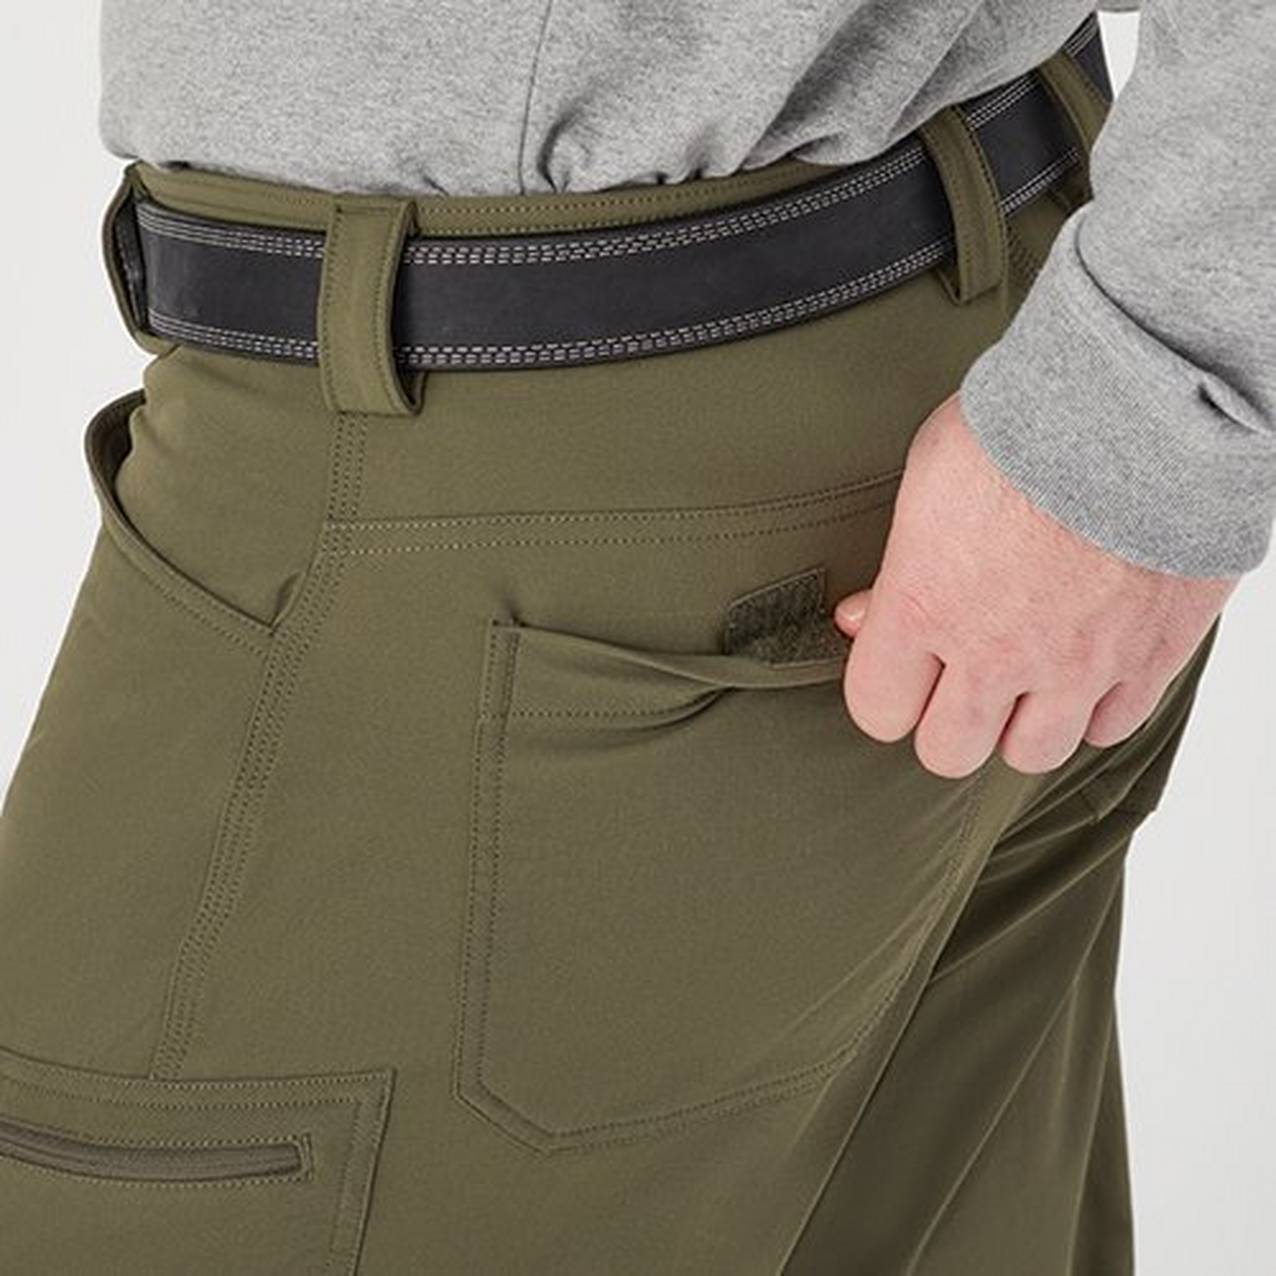 Close up of a hand opening the back pocket of pants to show a hook and loop closure of the pocket